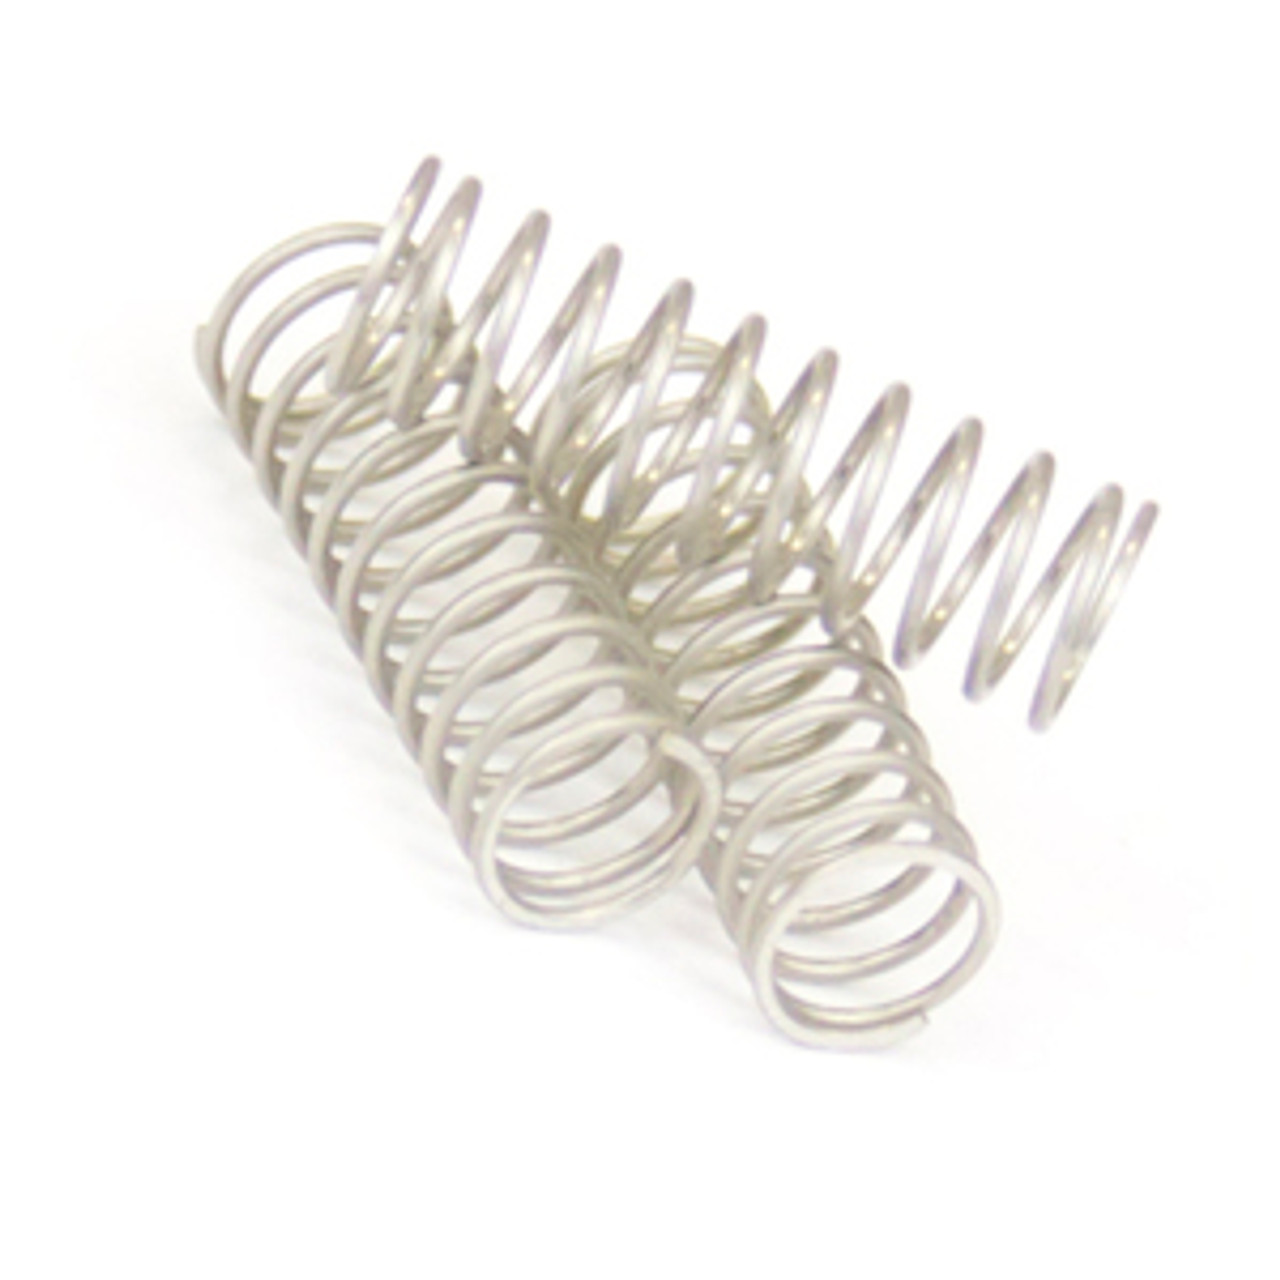 Welch 412259 SPRING,COIL for 1374,1397